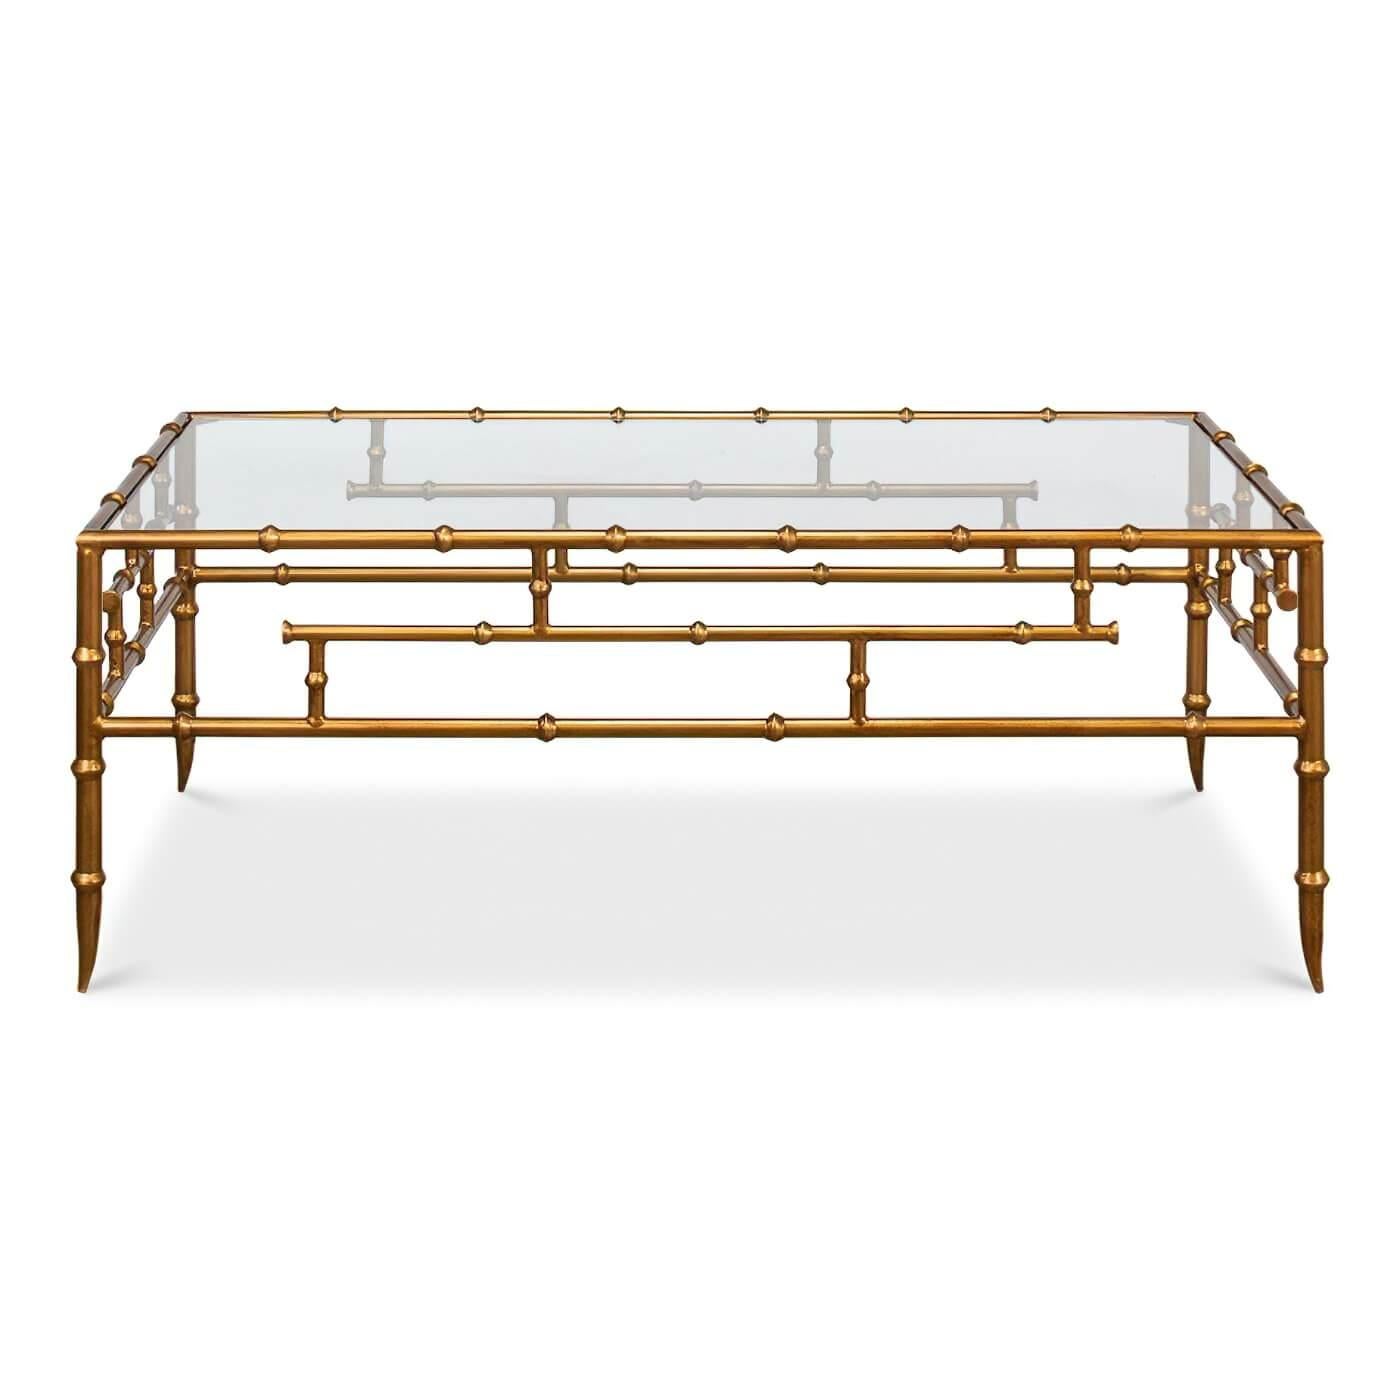 A Regency gilt bamboo coffee table. A classic and traditional piece with a glass top and elegant gold faux bamboo legs. 

Dimensions: 48